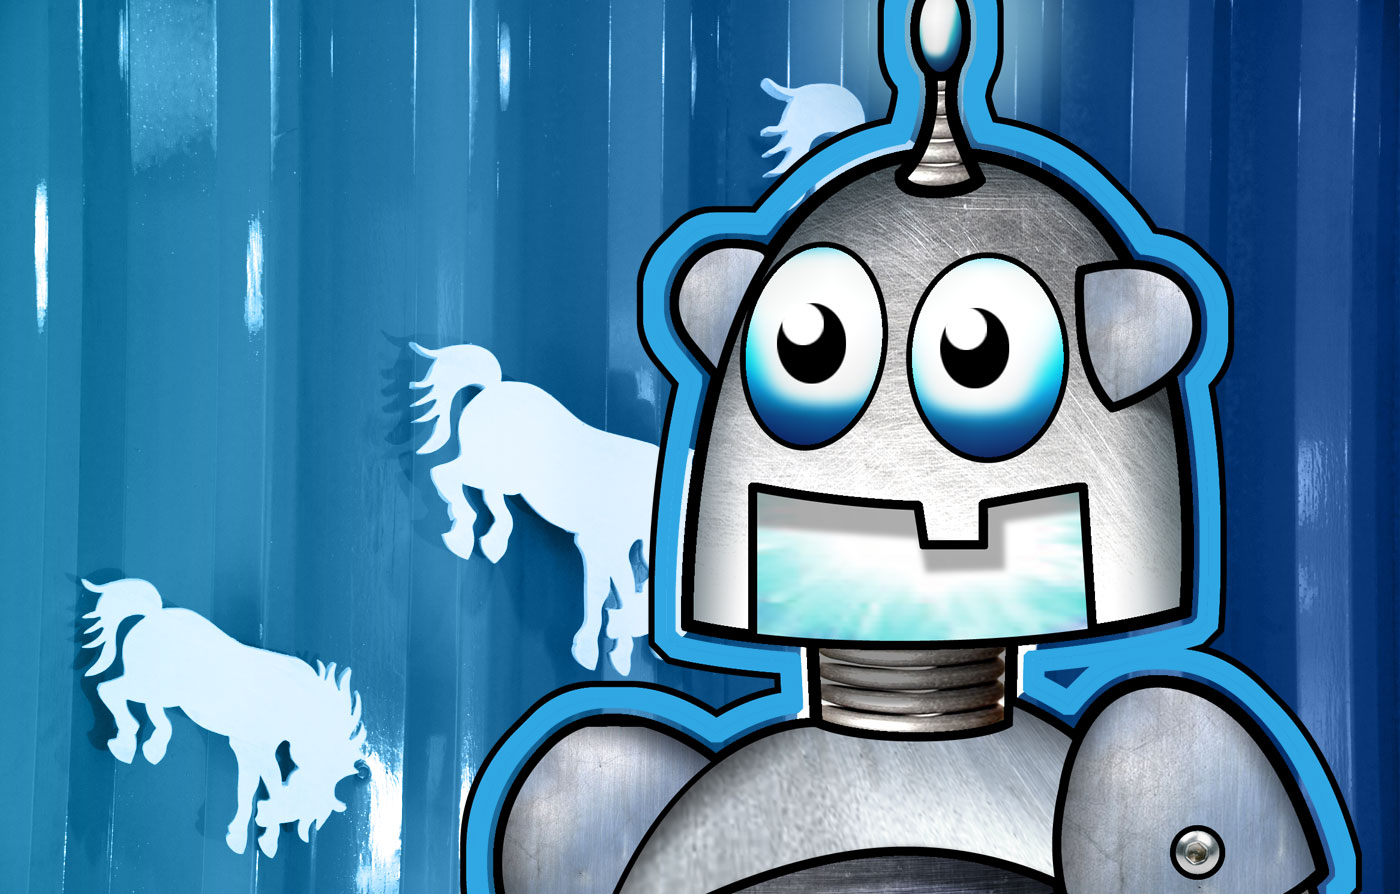 Penguin and Panda Bots Free to Download | Bronco > Our Ideas